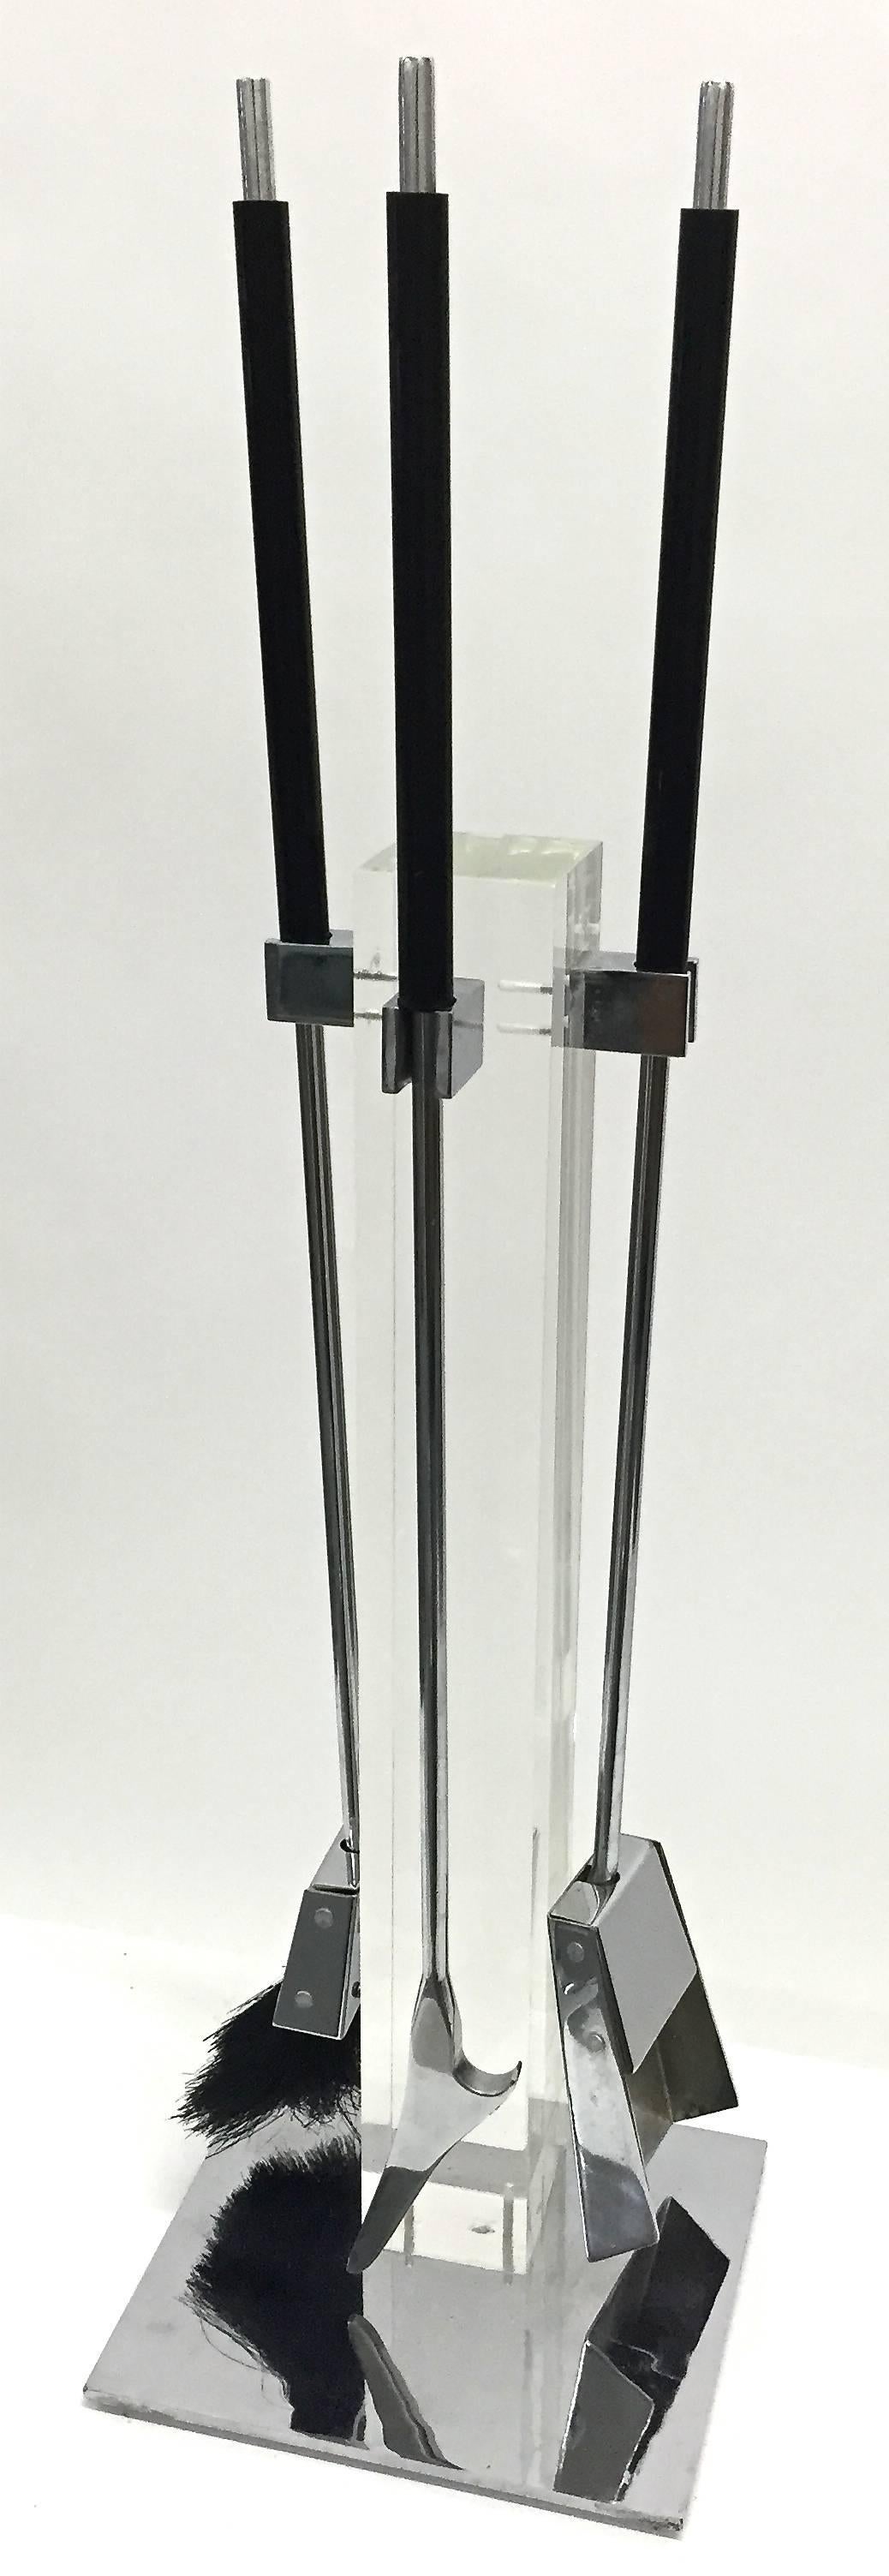 Fireplace tool set in lucite and chrome, Italy 1970s.